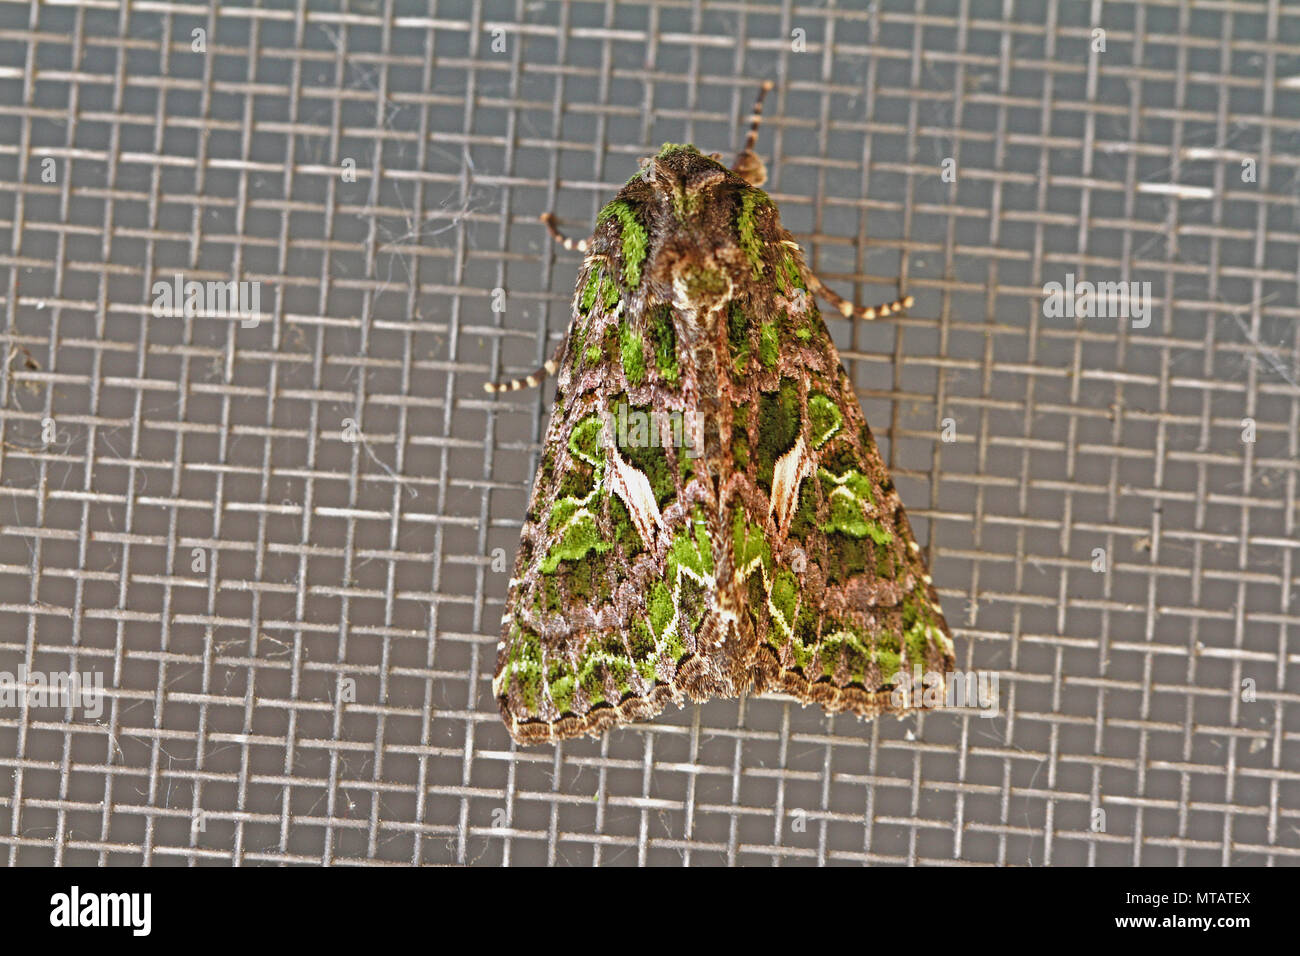 orache moth Latin trachea atriplicis a type of noctuid moth at rest on a screen door in Italy a continental moth rarely seen in mainland Britain Stock Photo